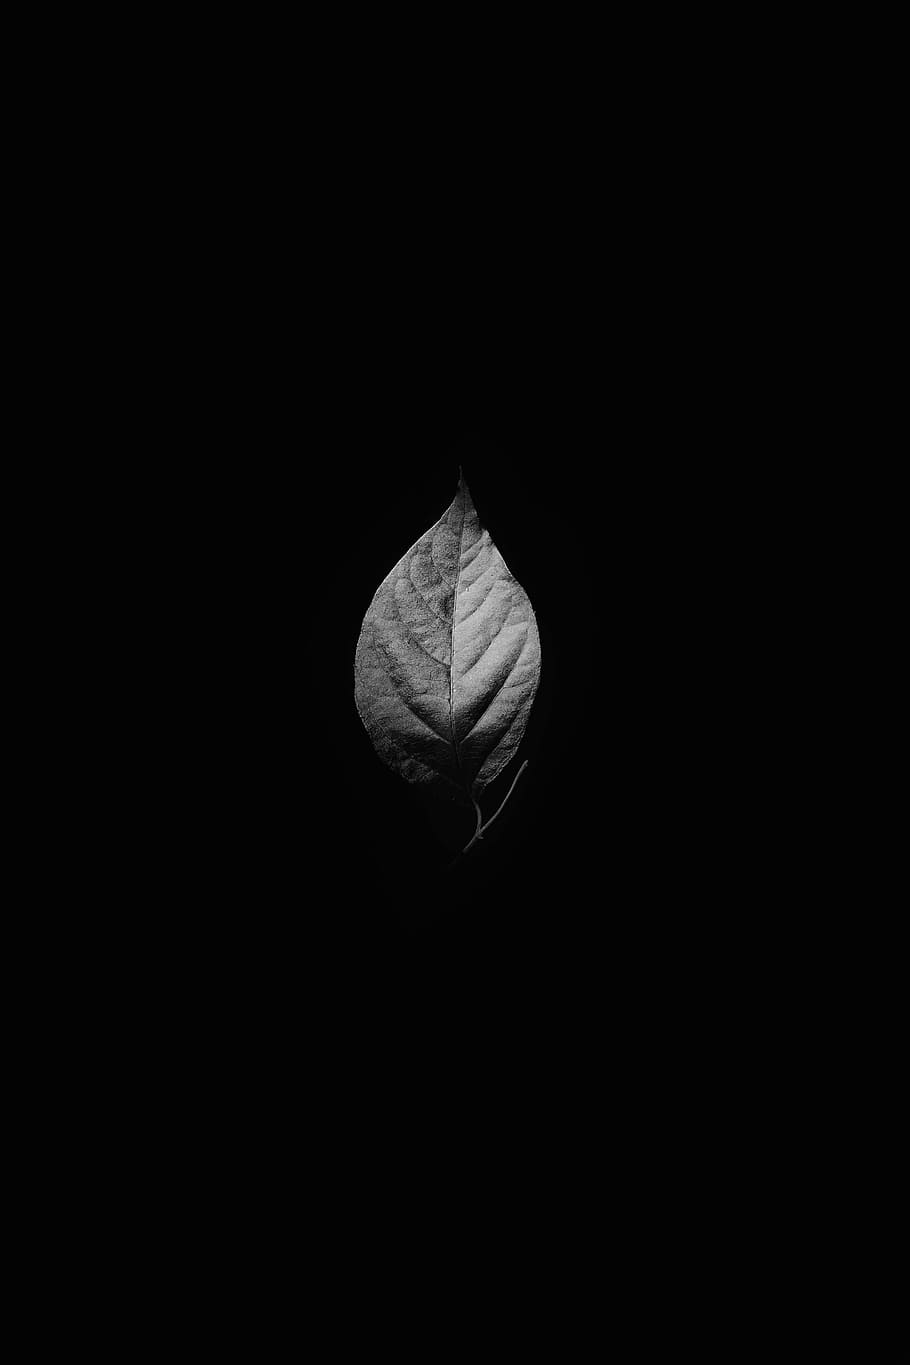 grayscale photography, leaf, leaves, plant, nature, veins, black and white, monochrome, dark, black Color